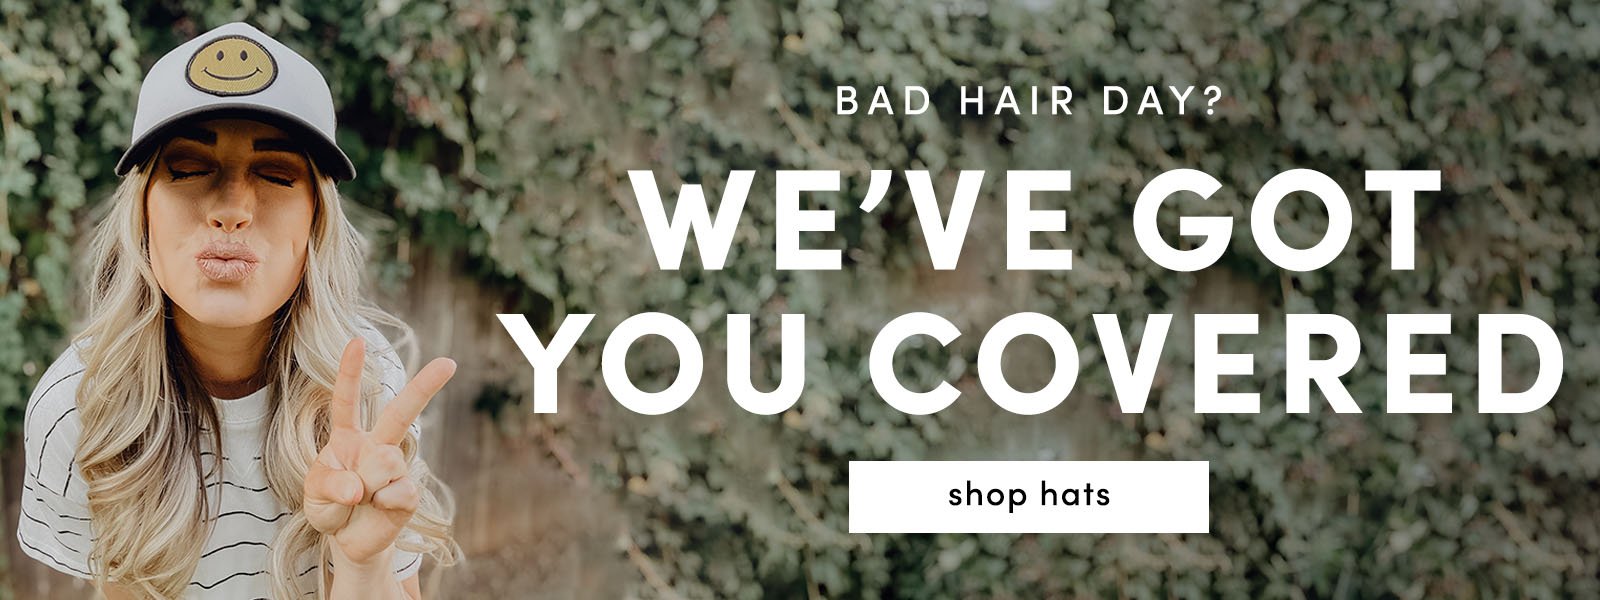 bad hair day? We've got you covered.